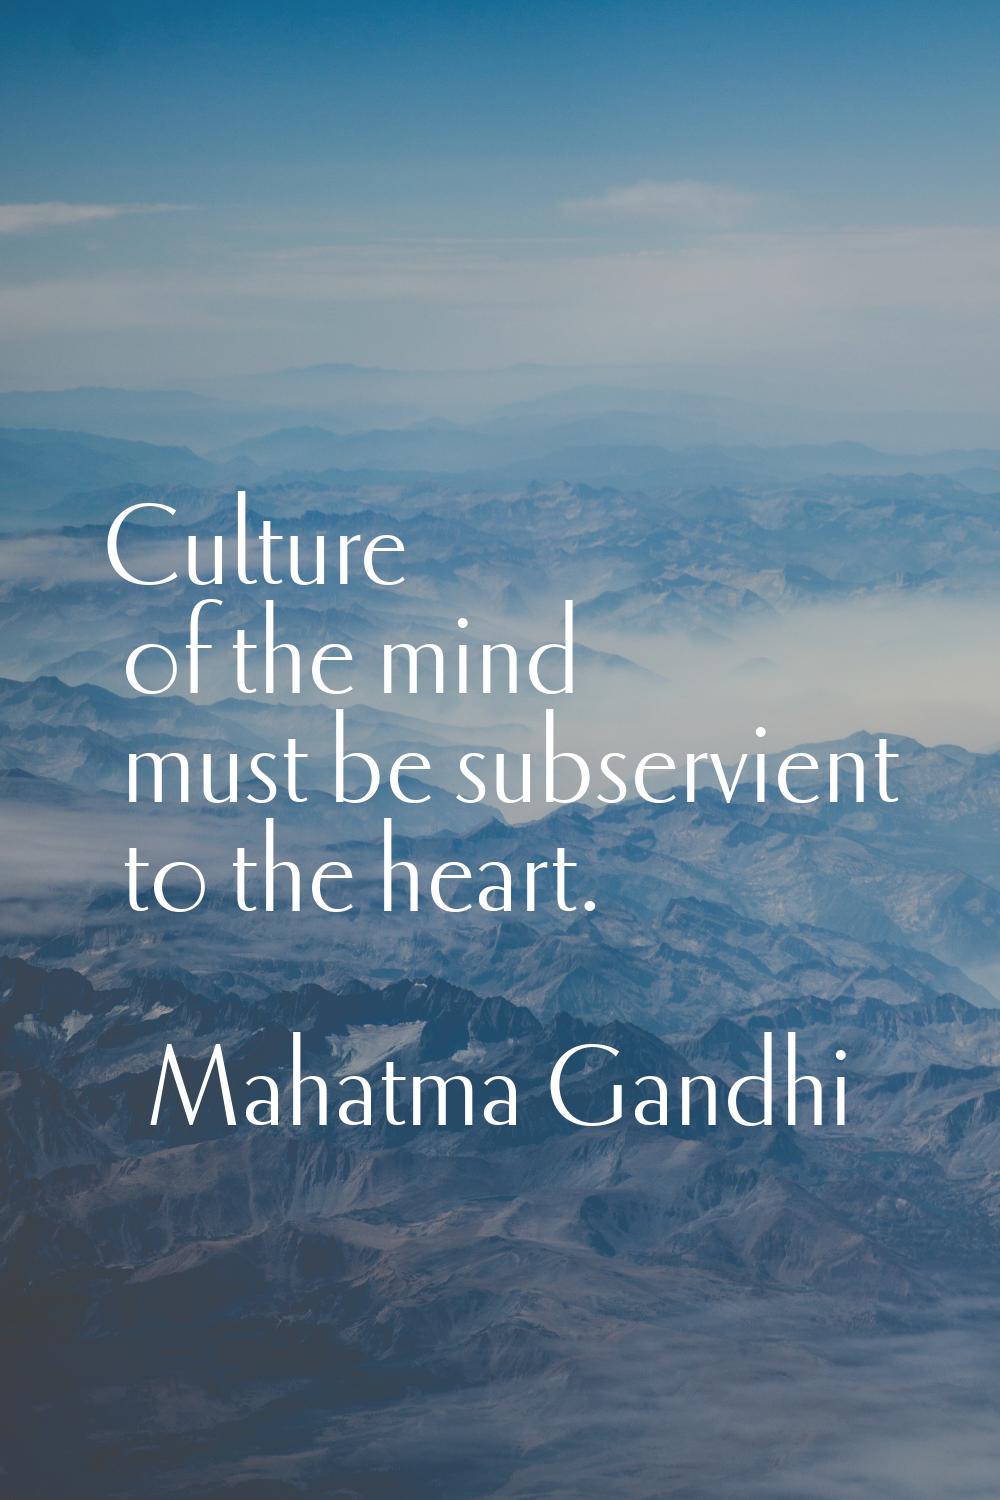 Culture of the mind must be subservient to the heart.